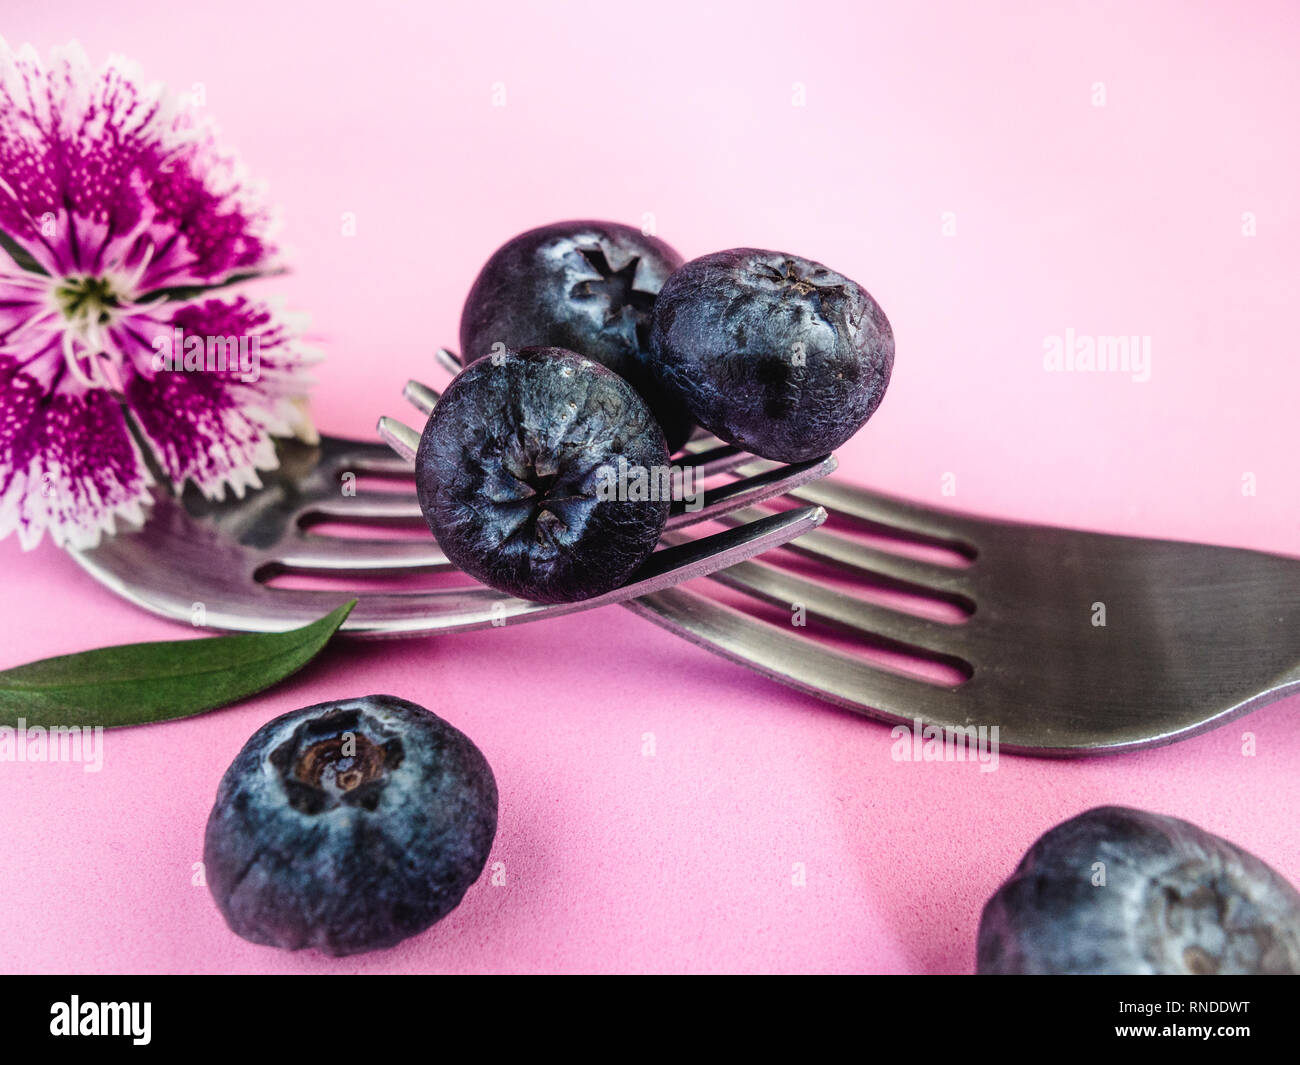 Four Blueberries and Two Forks on Pink Background Stock Photo